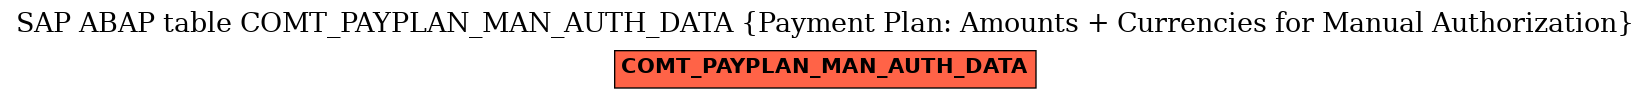 E-R Diagram for table COMT_PAYPLAN_MAN_AUTH_DATA (Payment Plan: Amounts + Currencies for Manual Authorization)